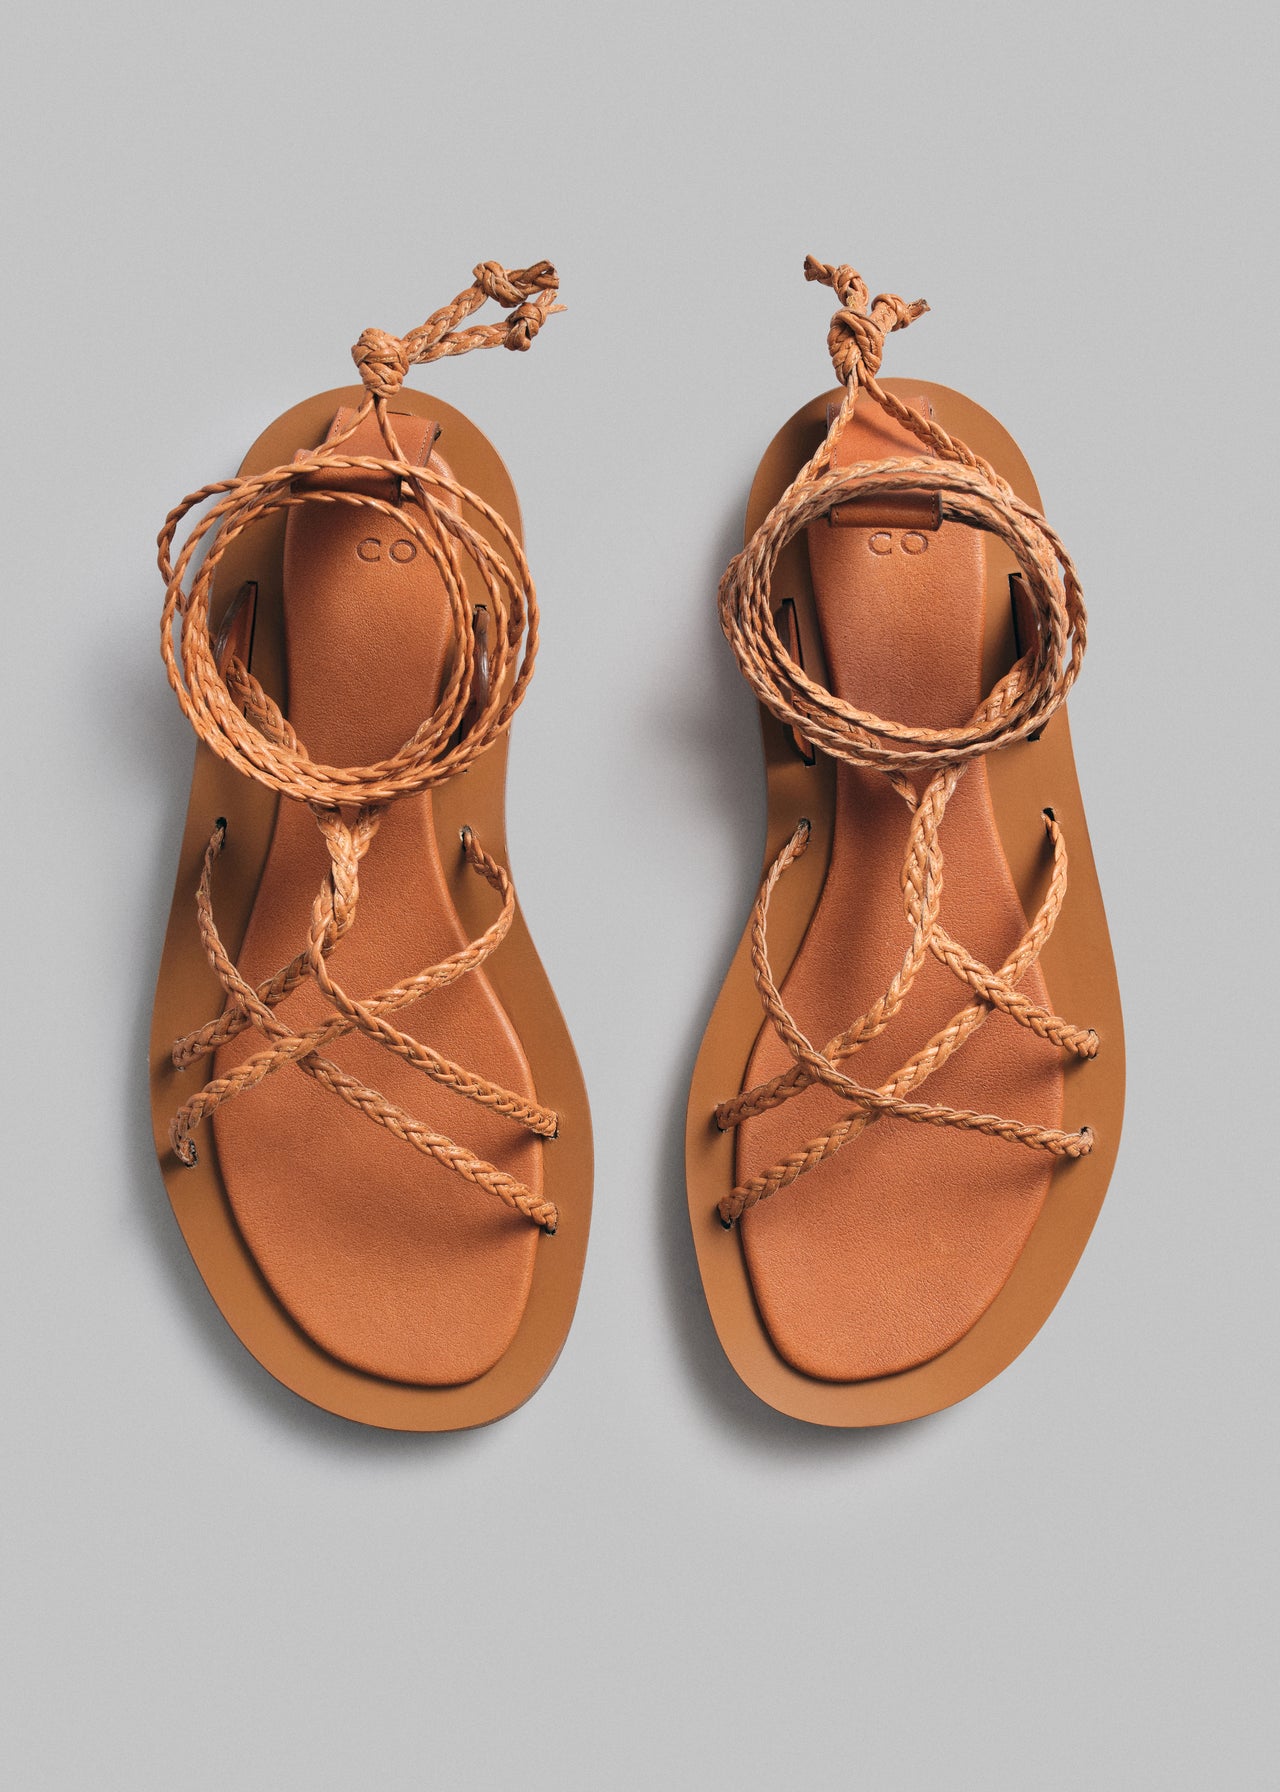 Braided Rope Sandal in Leather - Chestnut - CO